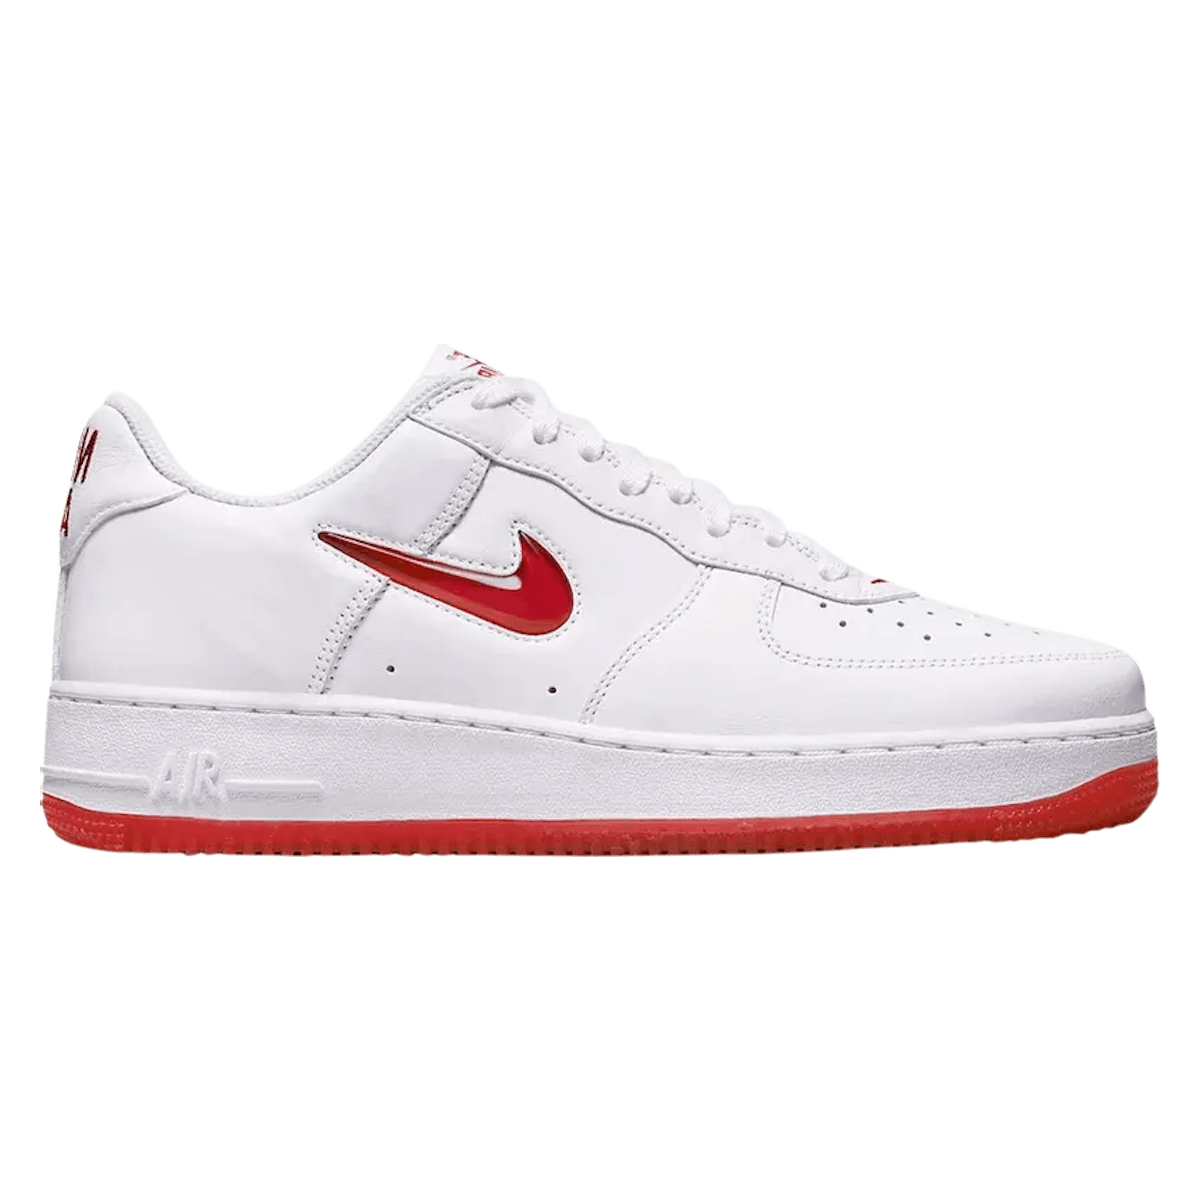 Nike Air Force 1 Jewel Color Of The Month "White University Red"